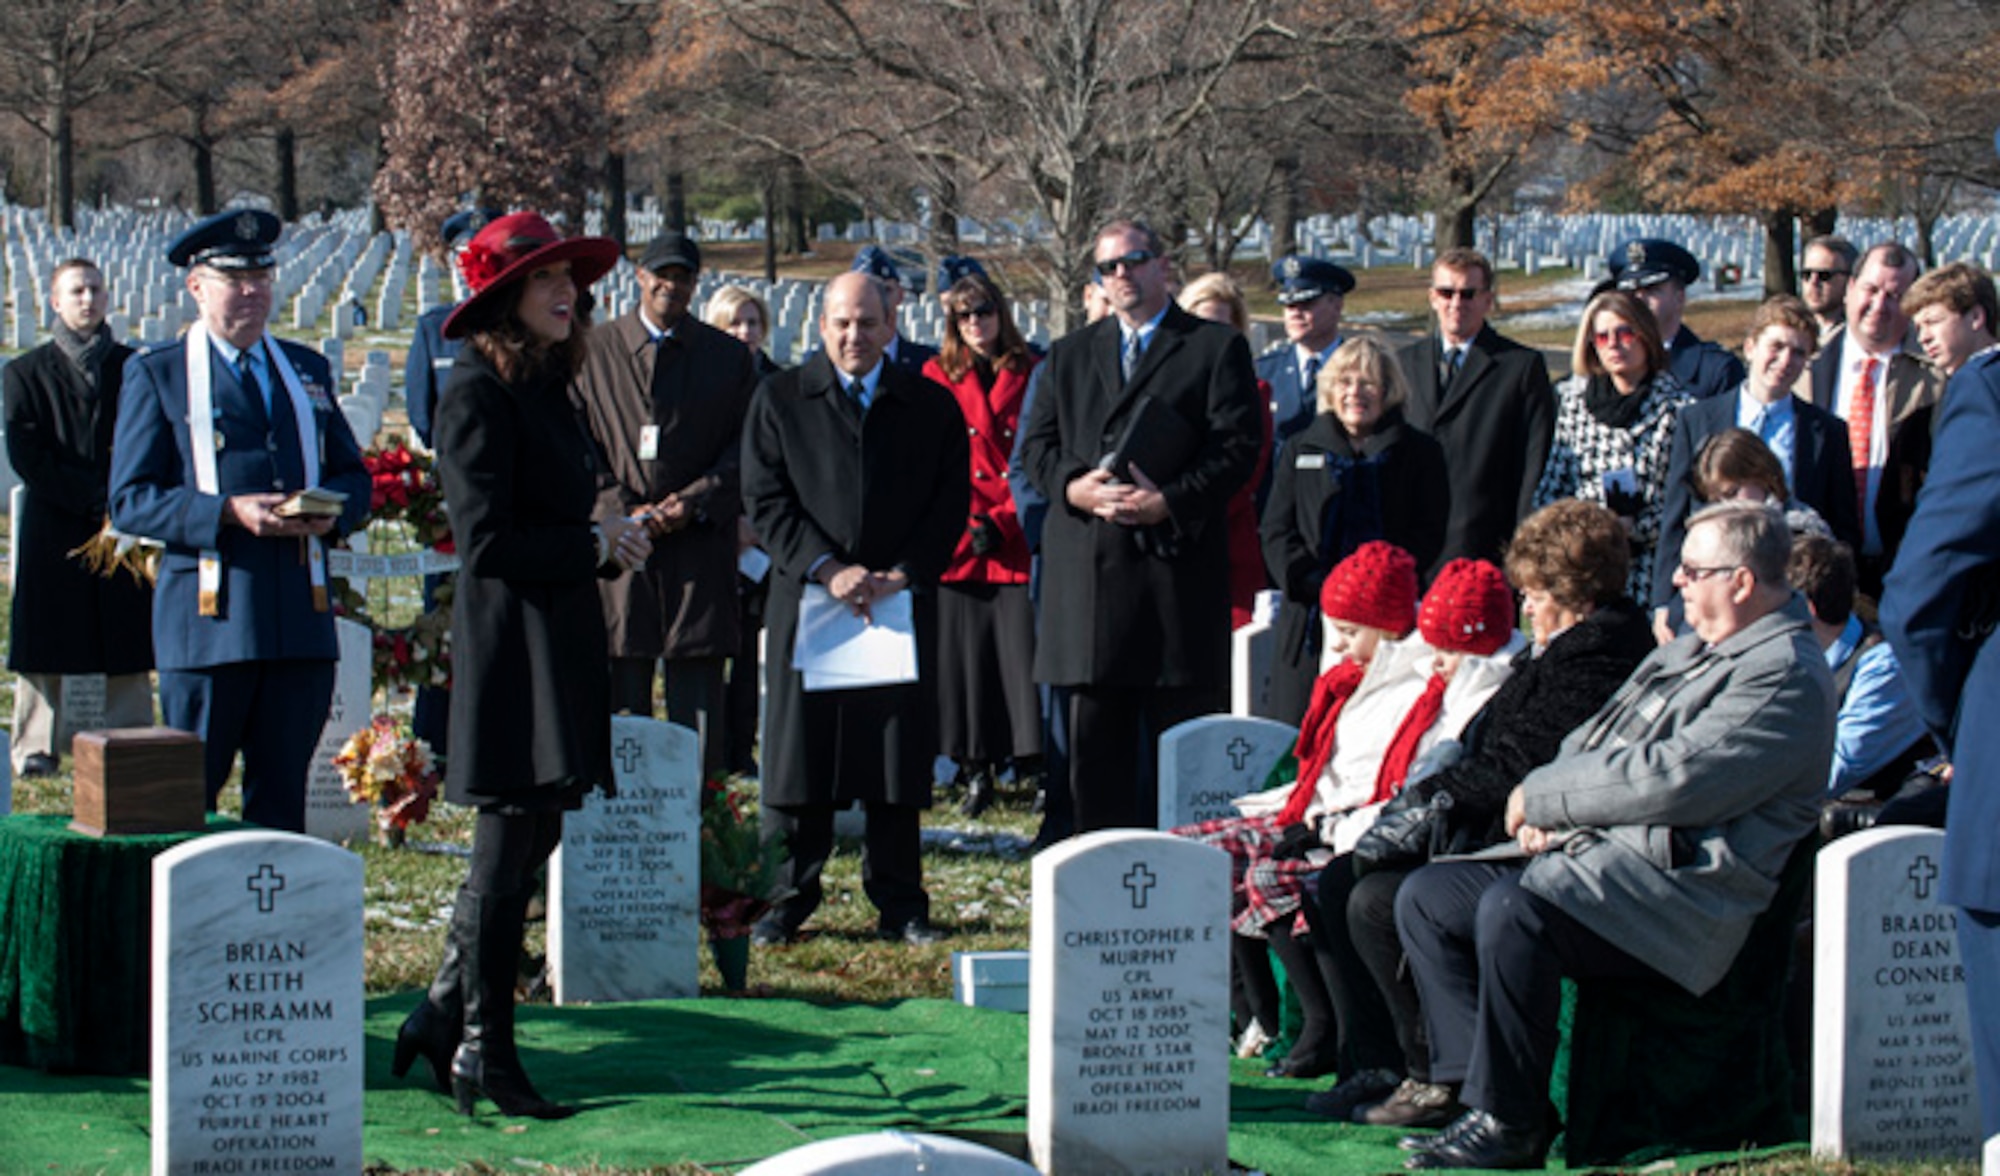 Ginger Gilbert Ravella, speaks during her late husband, Maj. Troy Gilberts??? remembrance funeral at Arlington Cemetery, Dec. 11, 2013. Gilbert was an F-16 Fighting Falcon pilot whose aircraft crashed on Nov. 27, 2006 during Operation Iraqi Freedom. (U.S. Air Force photo by Staff Sgt. Carlin Leslie)